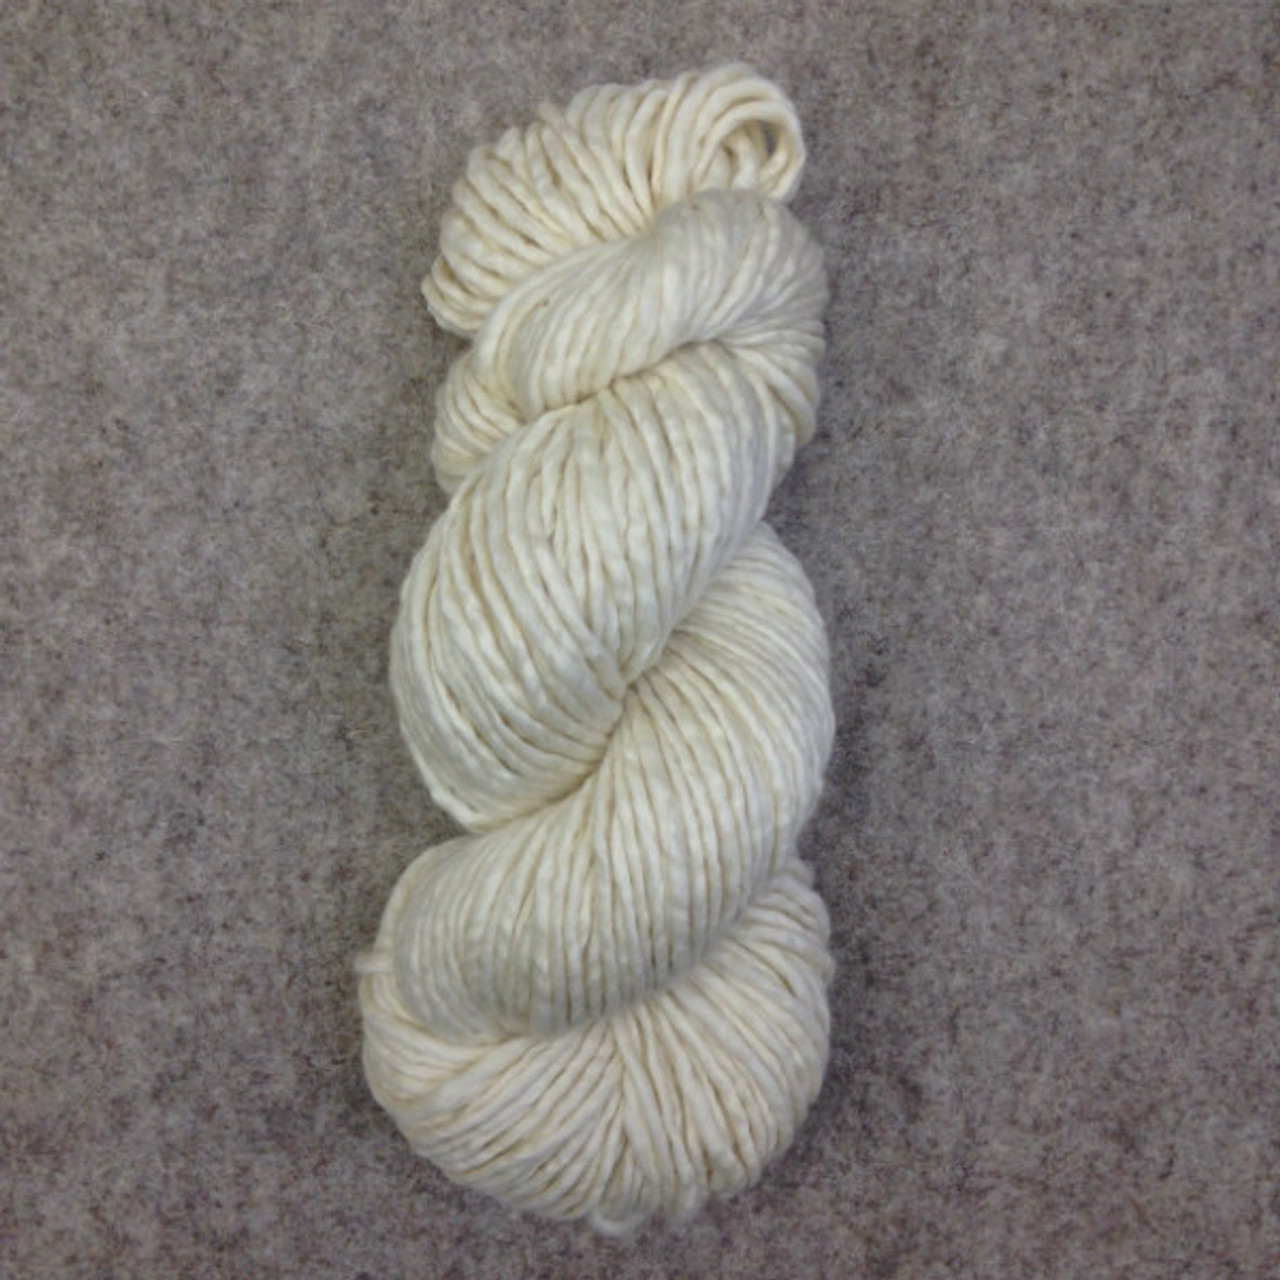 Natural Undyed Yarn - Worsted Weight - A Child's Dream